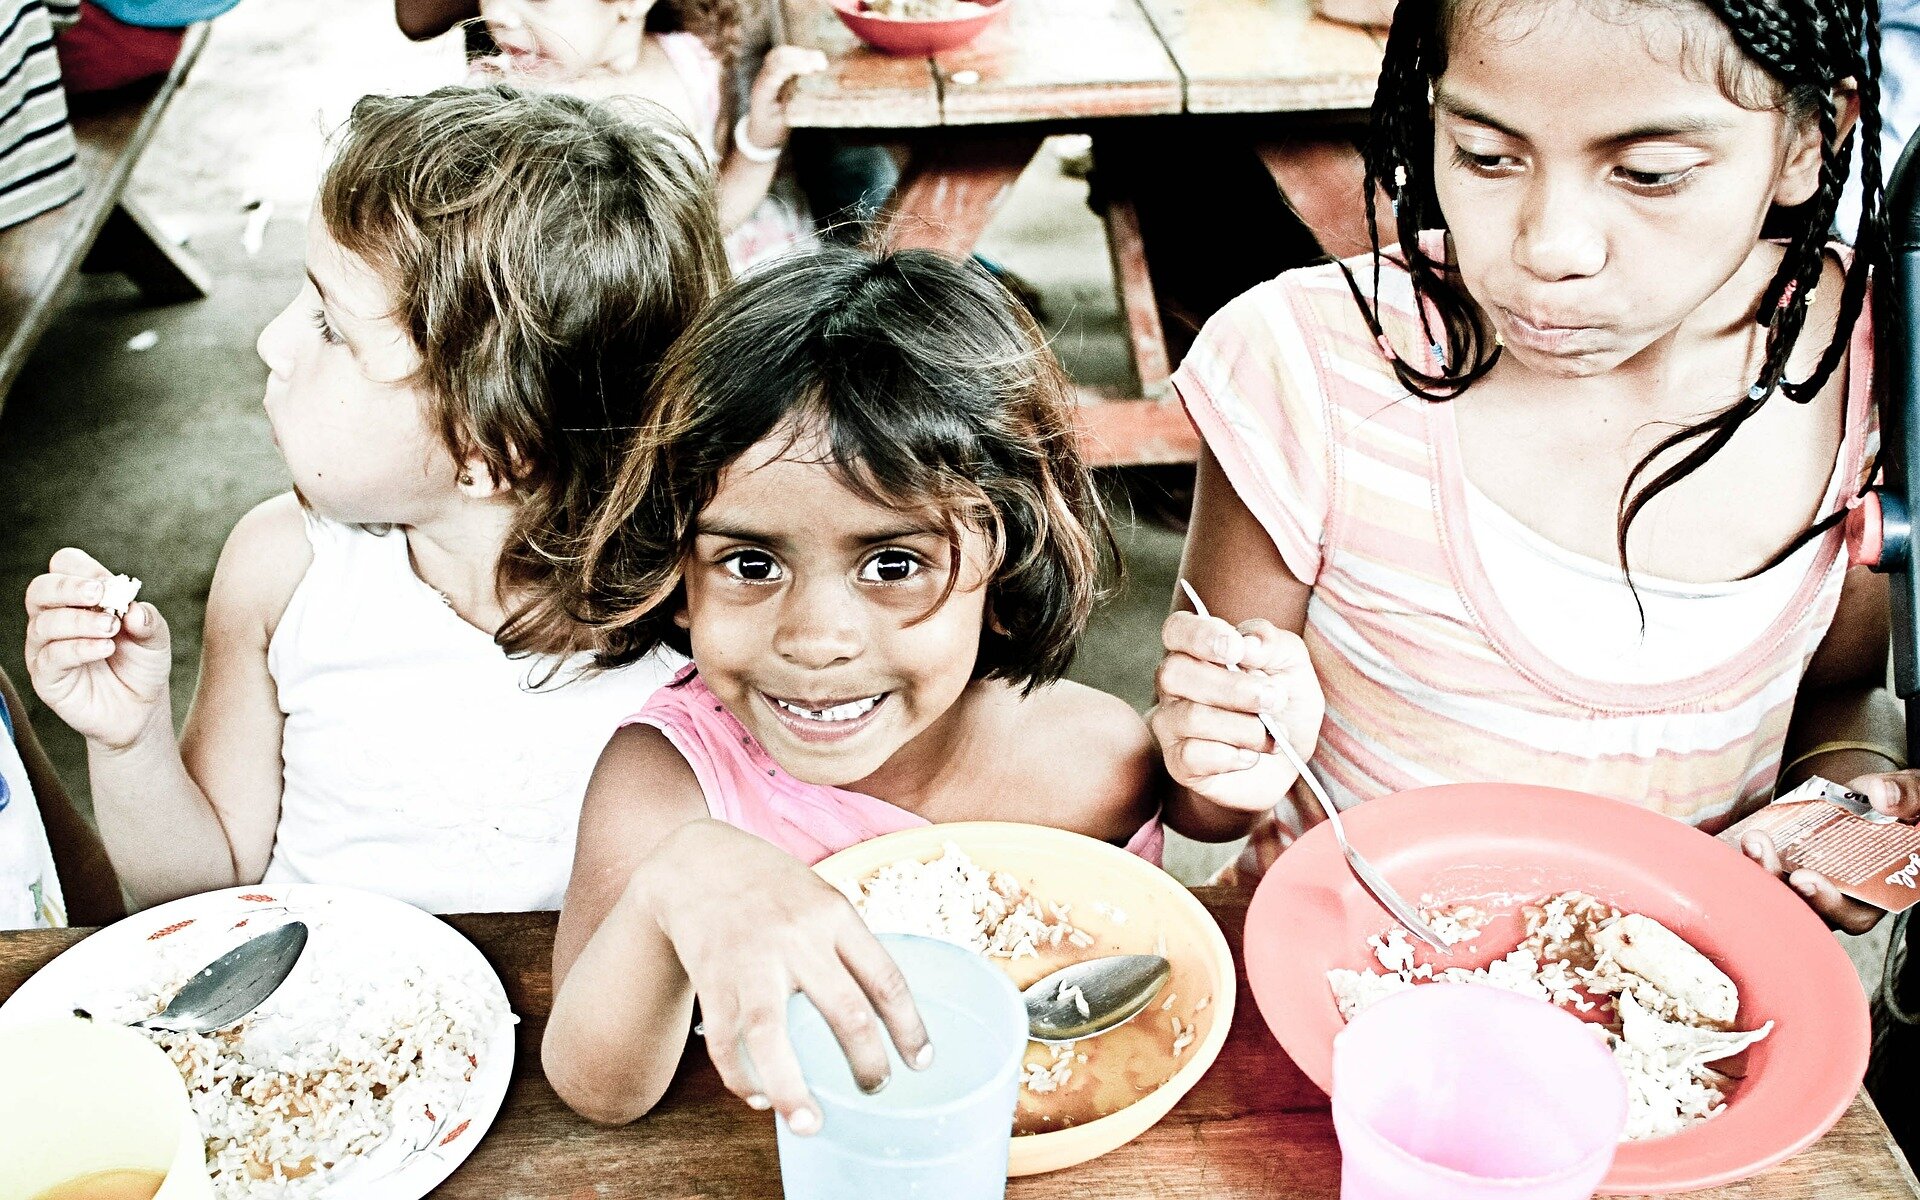 Pandemic exposed weakness in ensuring healthy food access in child care